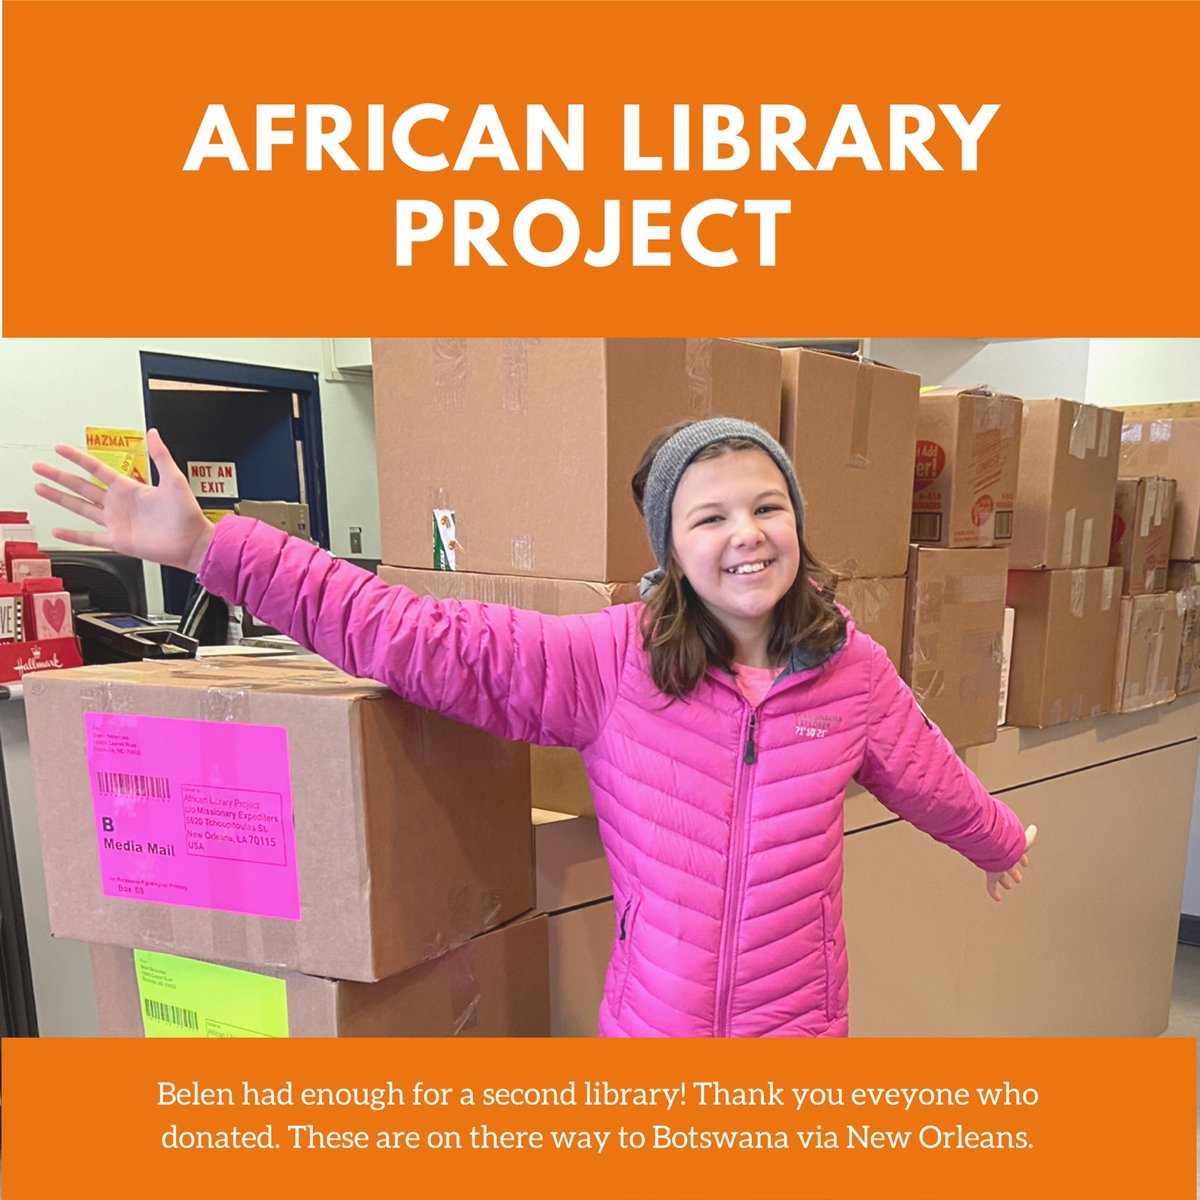 Belen’s Birthday Wish Came True in Spades. Her friends and loved ones donated 2,500 books for the @africanlibraryproject. Enough for two libraries! They are now on there way to New Orleans where they will be combined with other donations heading to Botswana.